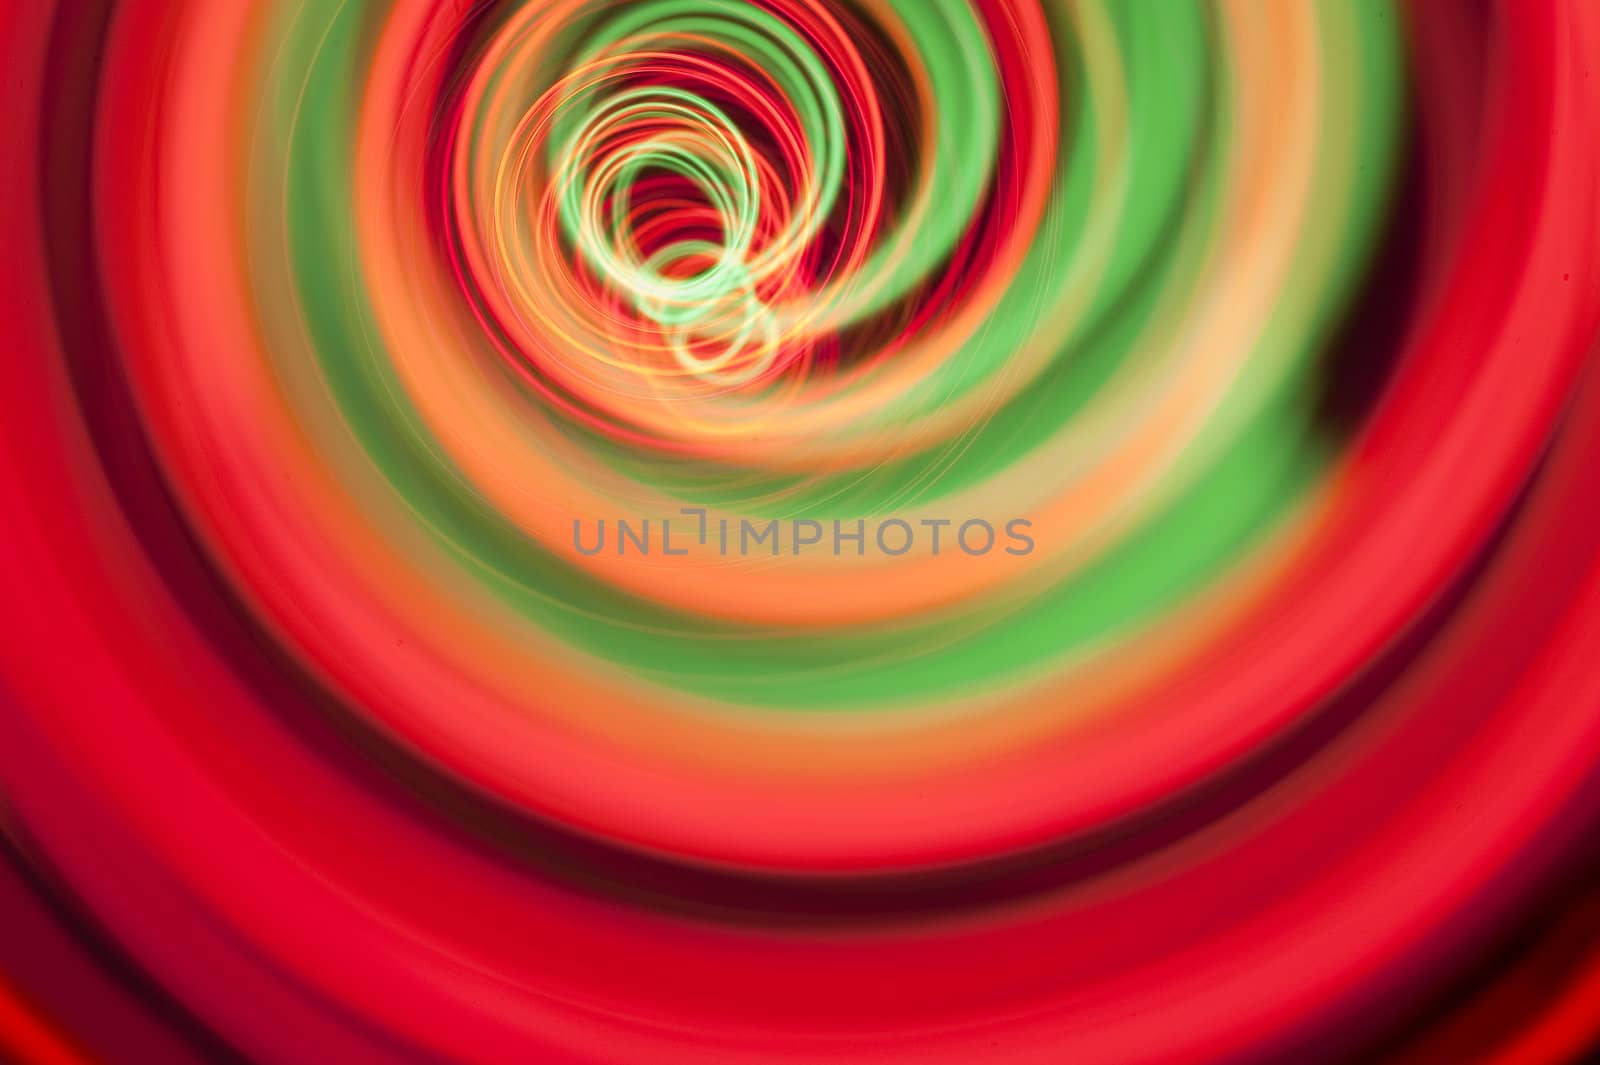 vividly colored red and green spiral of light created in camera